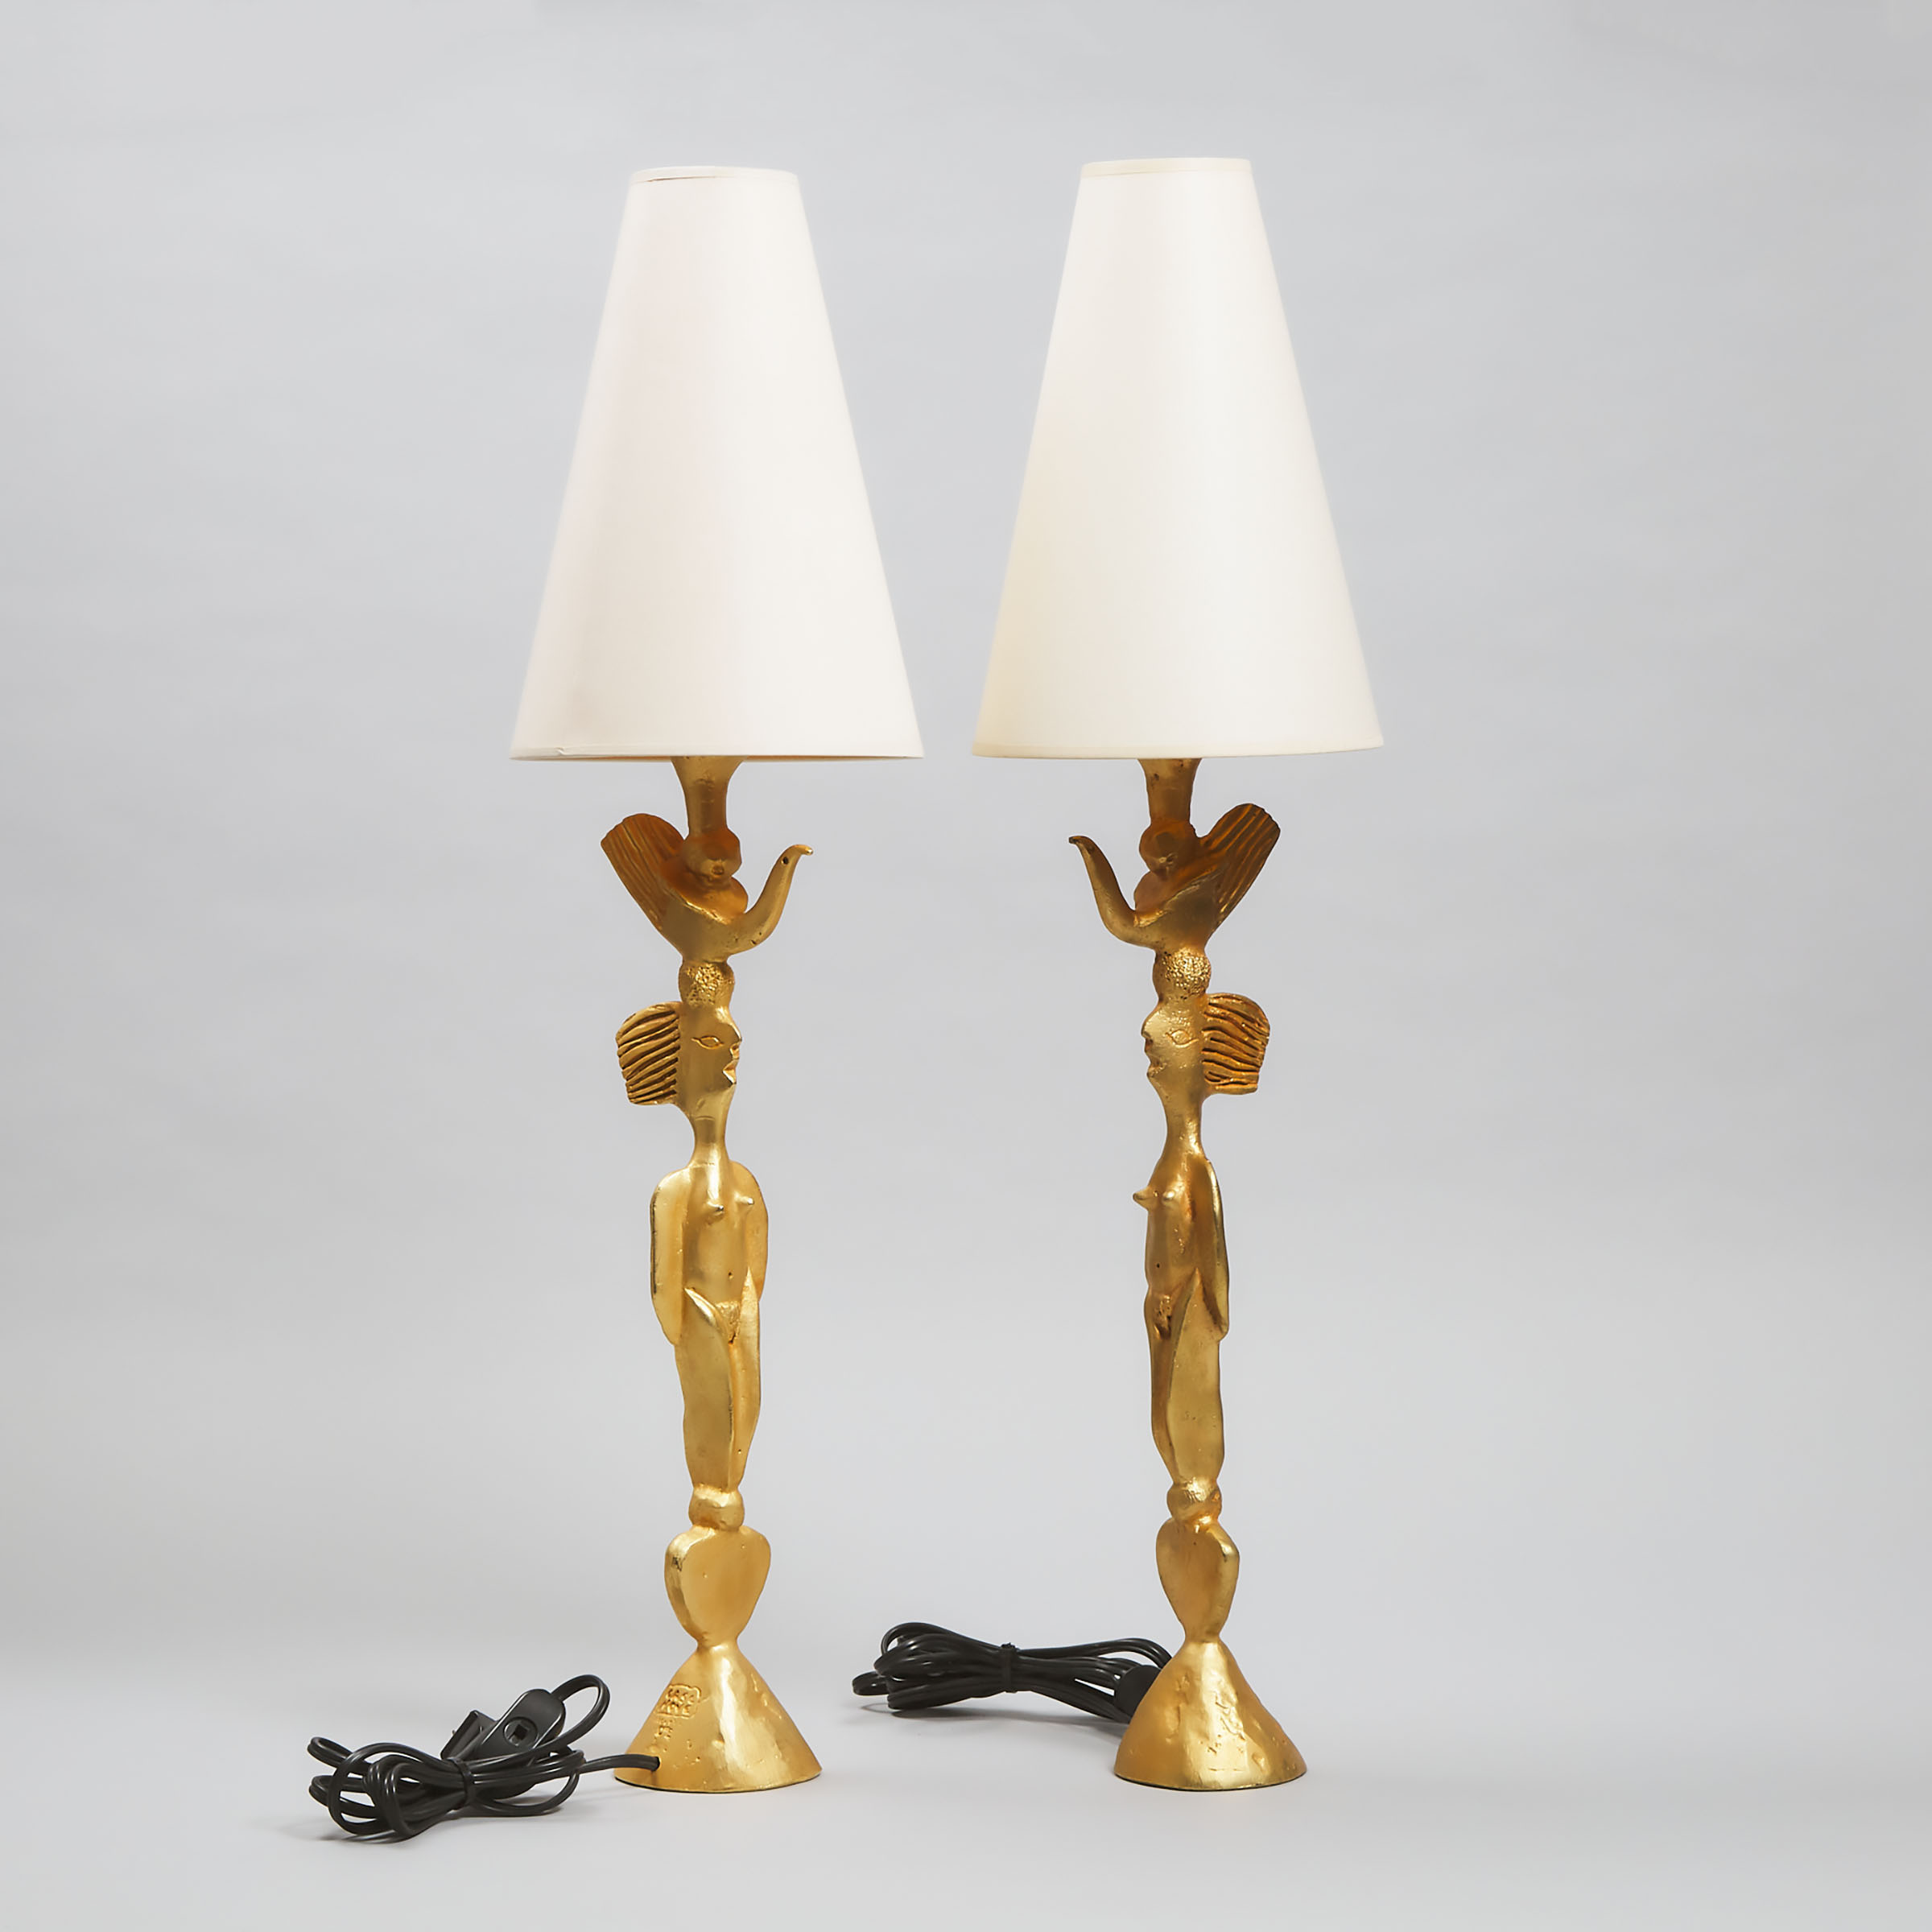 Pair of Pierre Casenove (French, b.1967) for Fondica 'Totem Femme' Table Lamps, c.1994